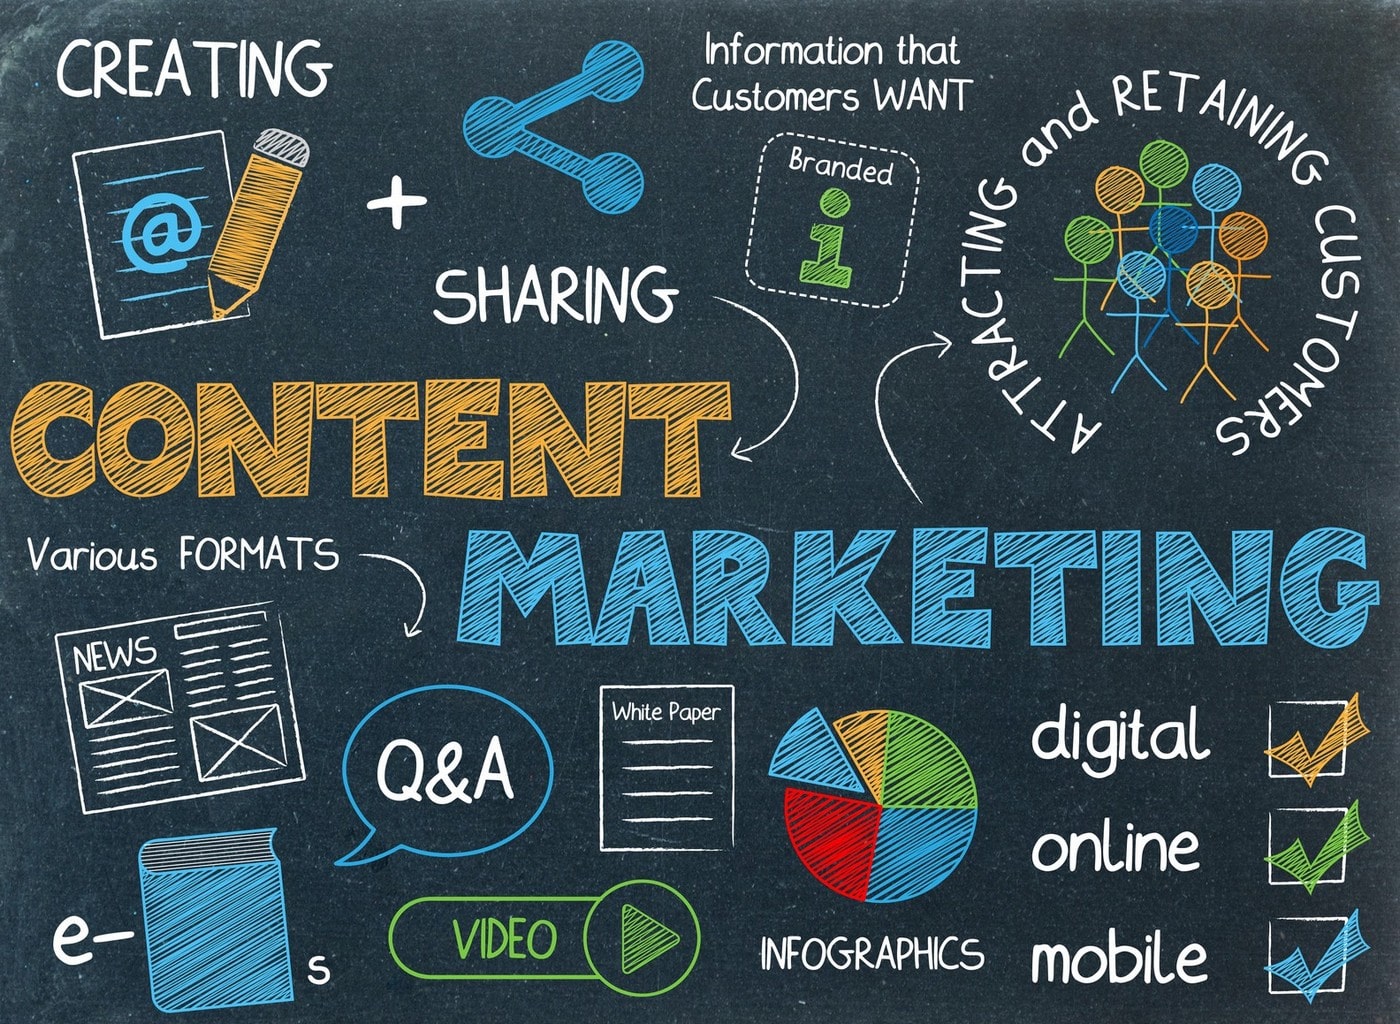 Content-Marketing-Who-to-direct-it-to-To-people-or-search-engines